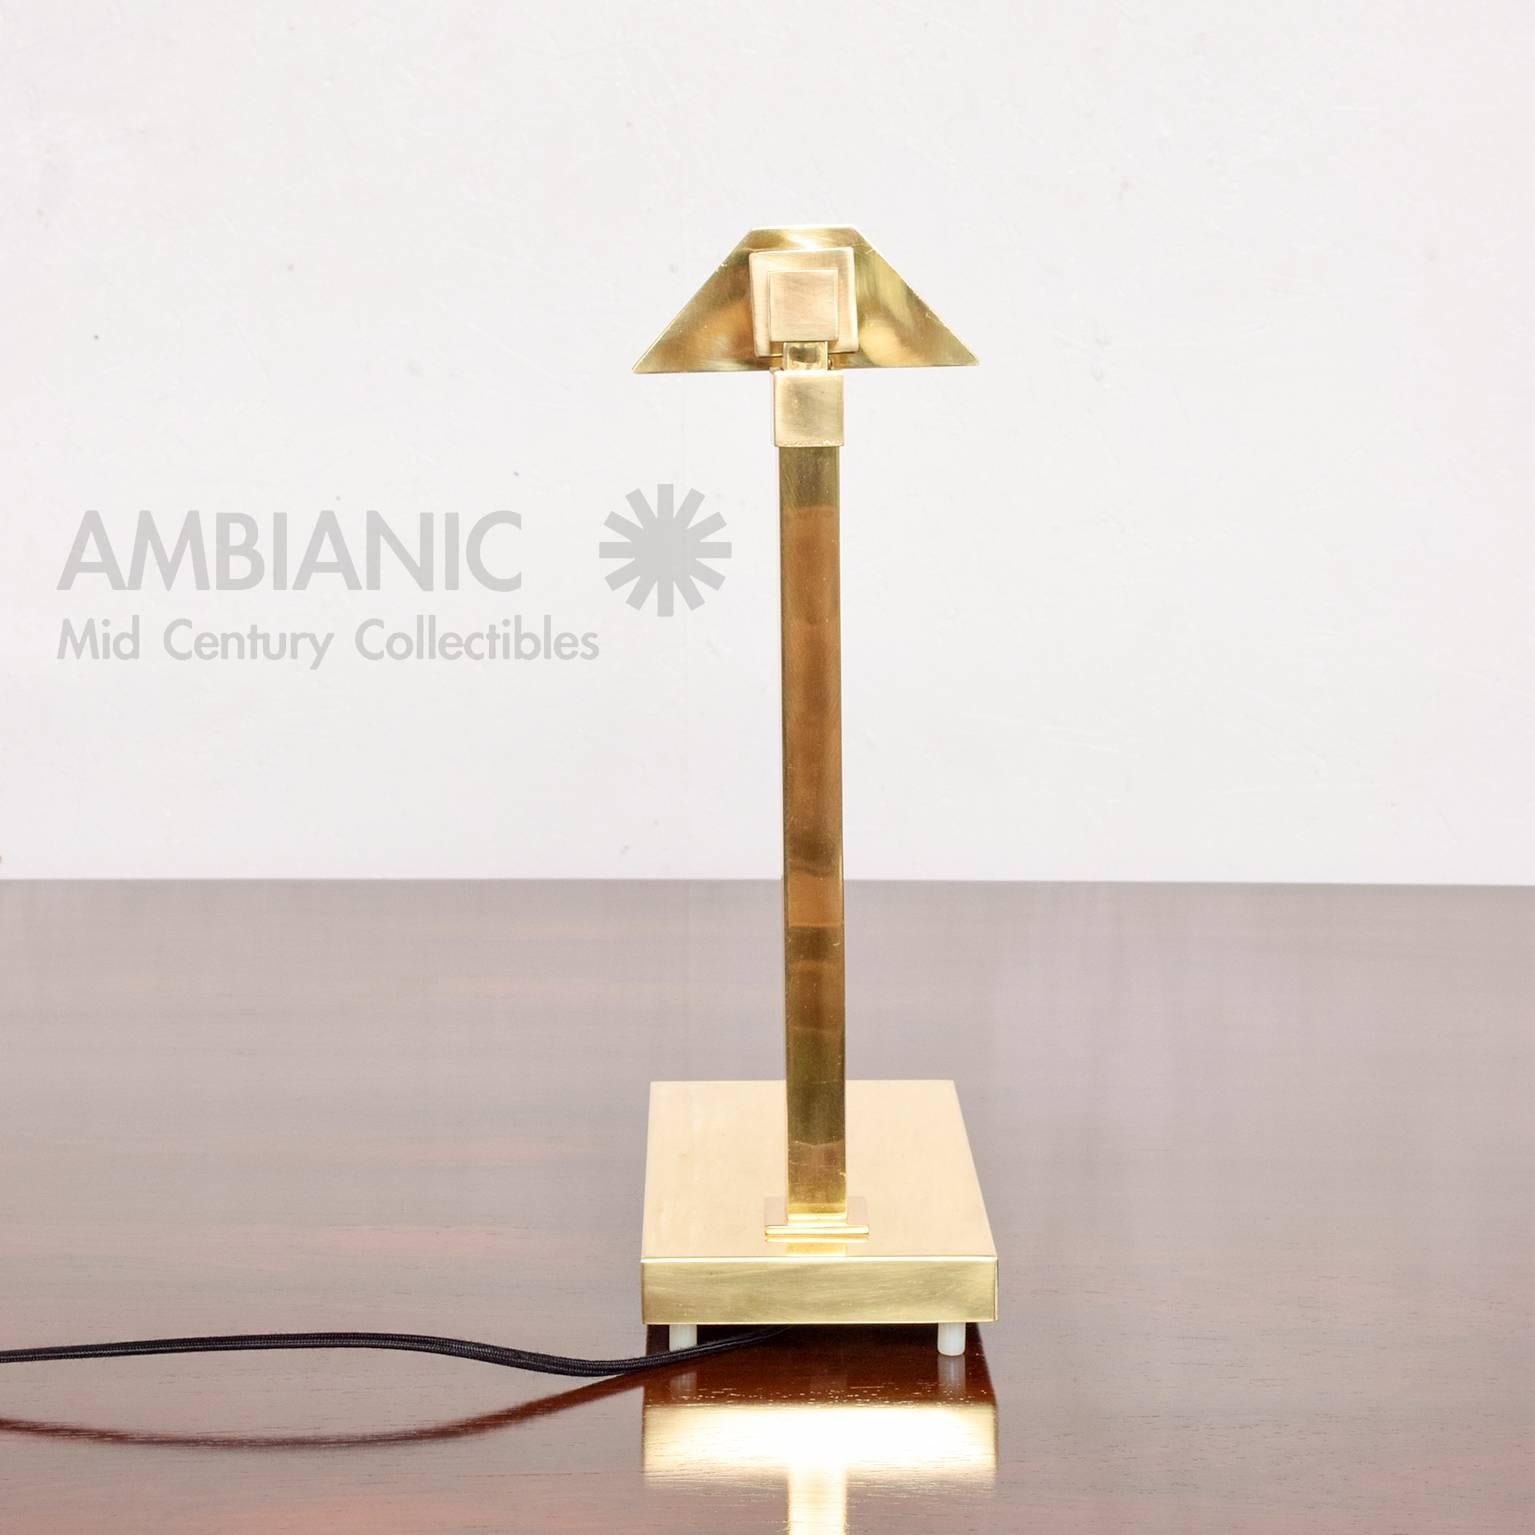 For your consideration a vintage table or desk lamp with brass shade (adjustable)

Attributed to Casella, USA, circa 1970s.

Measures: 16